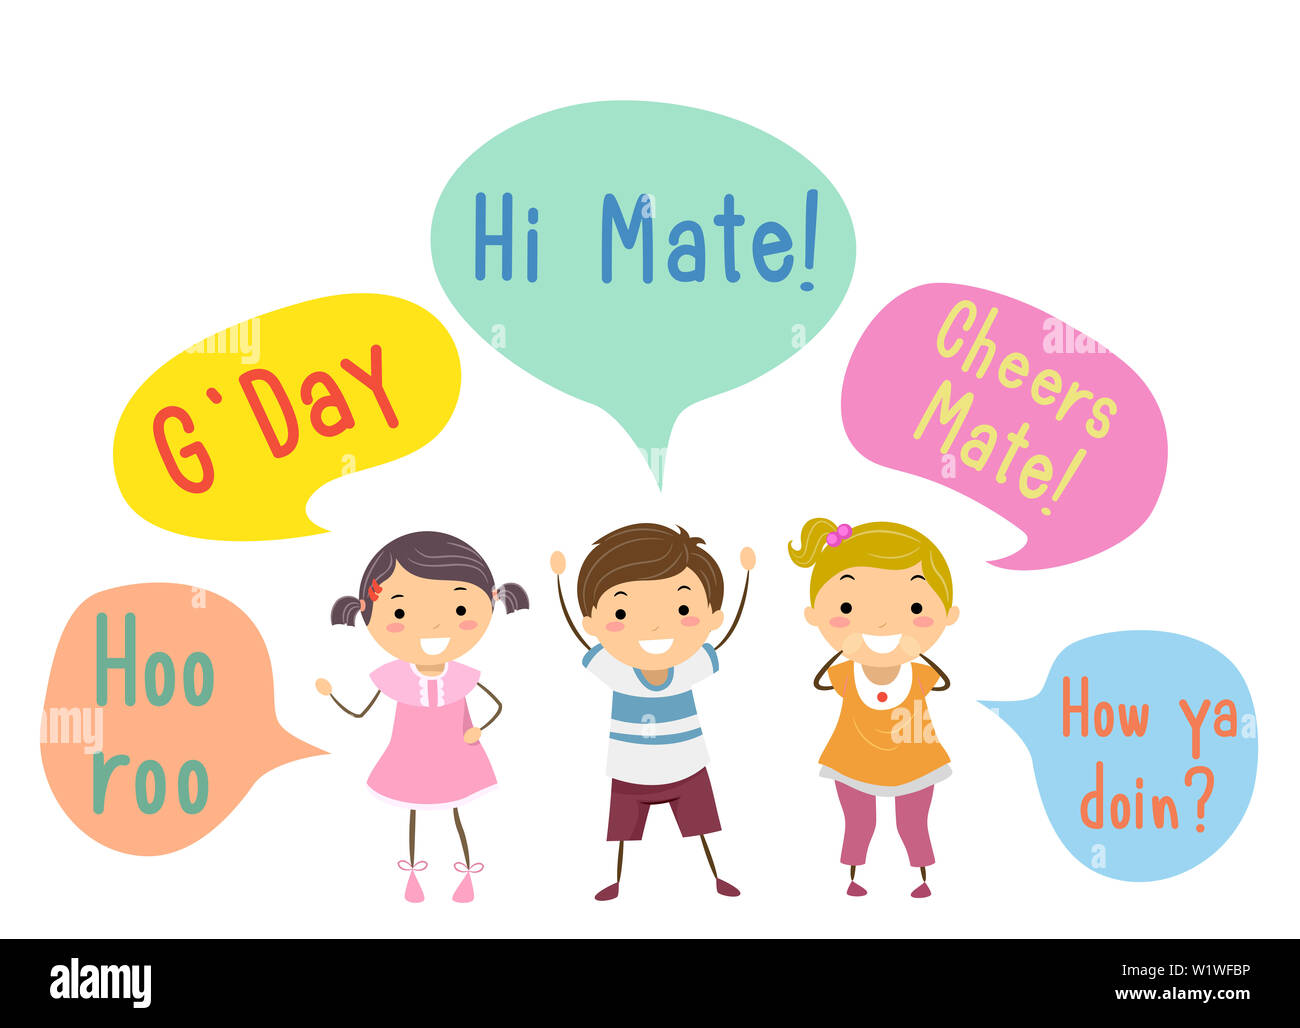 Illustration of Stickman Kids Talking, Waving with Speech Bubbles with in Australia Stock Photo -